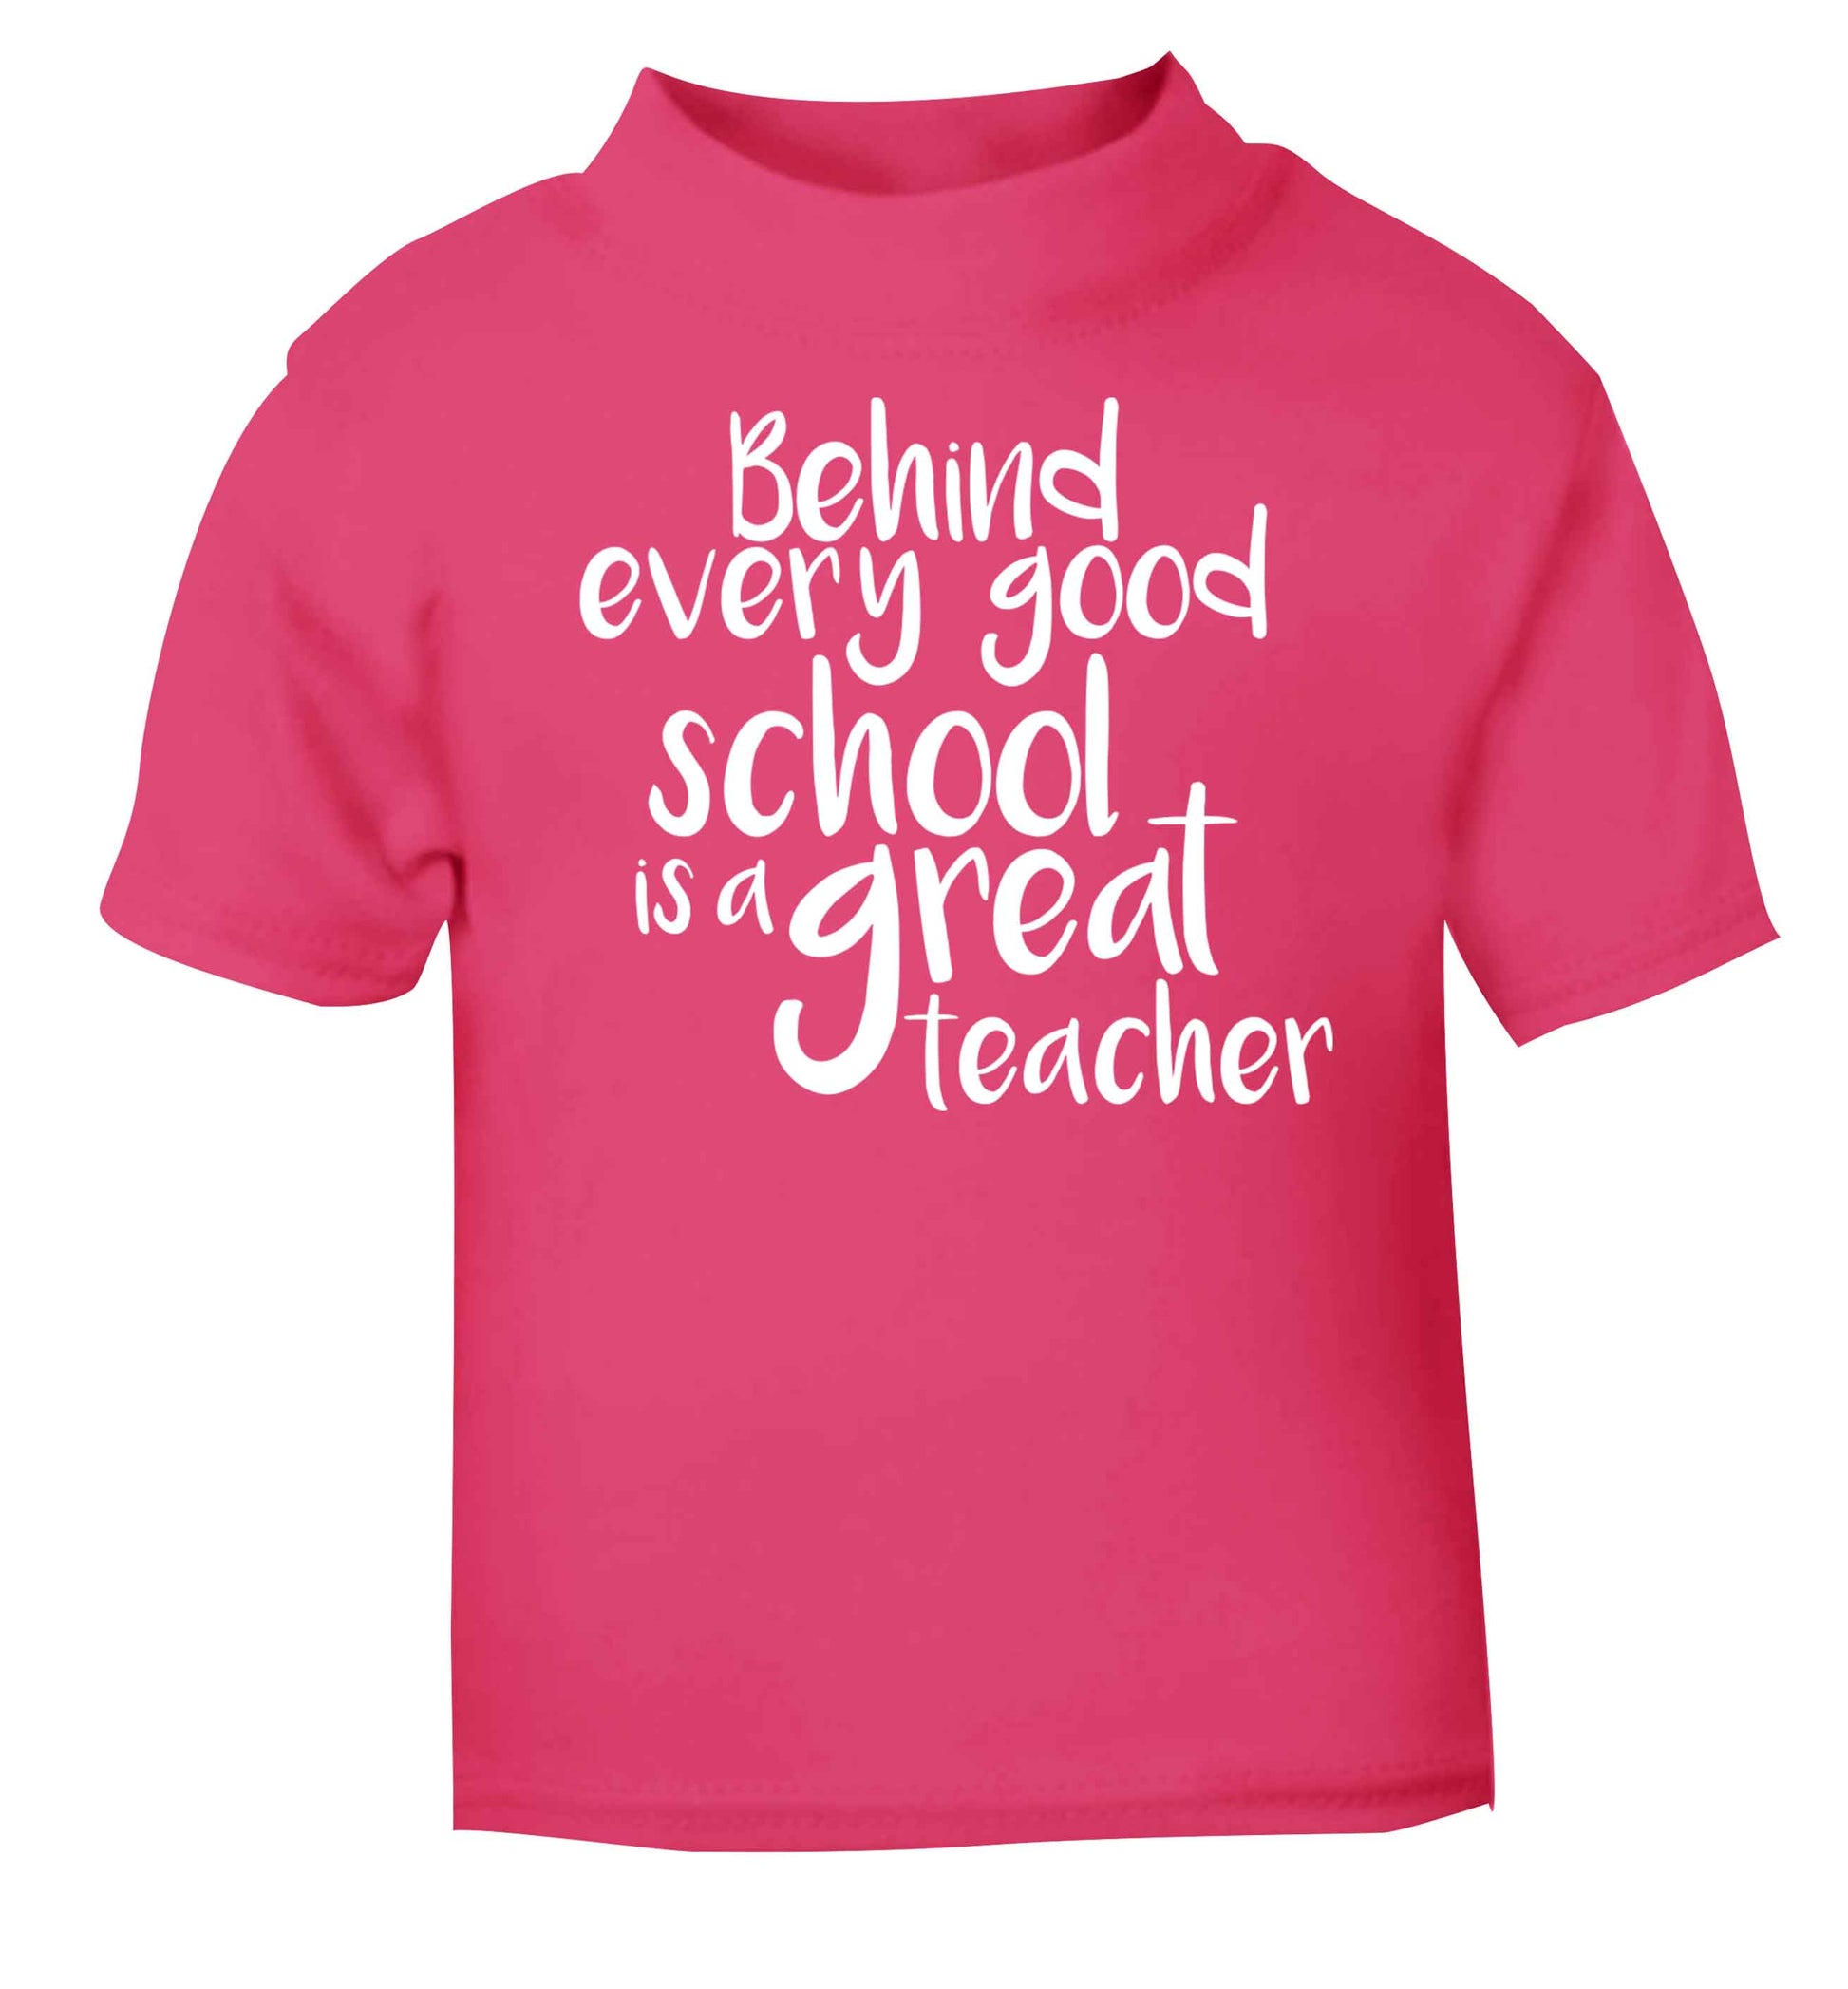 Behind every good school is a great teacher pink baby toddler Tshirt 2 Years